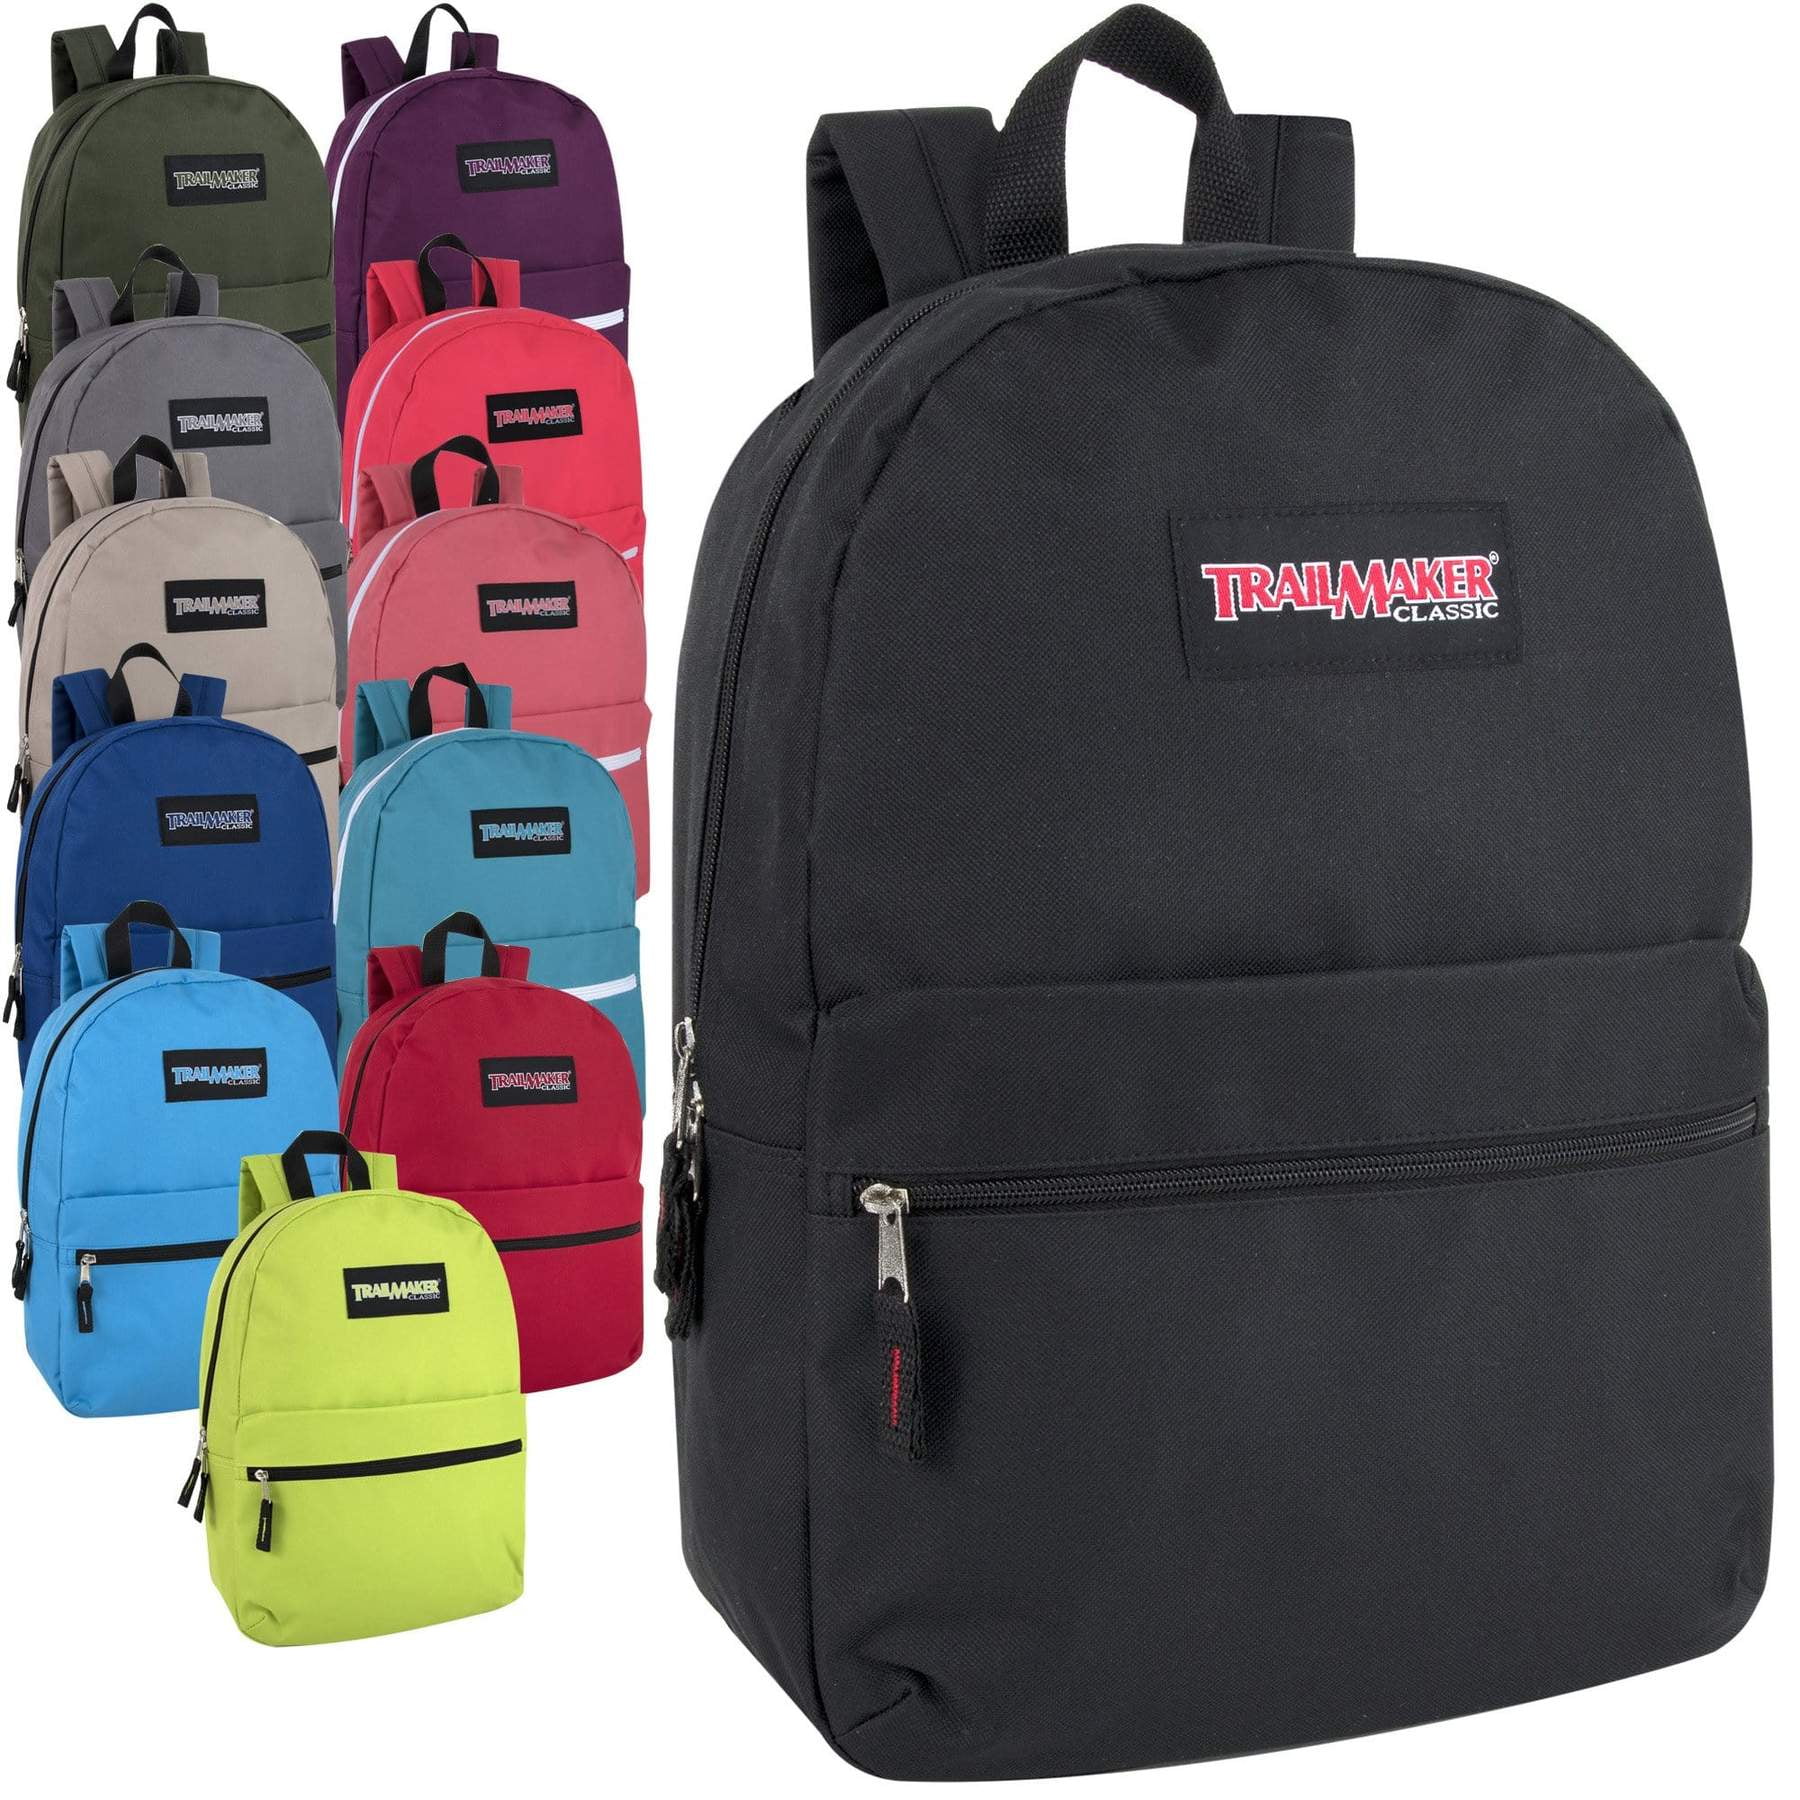 Bulk Case of 24 Classic Bookbags 17 Inch Wholesale Backpacks In 3 Assorted Colors